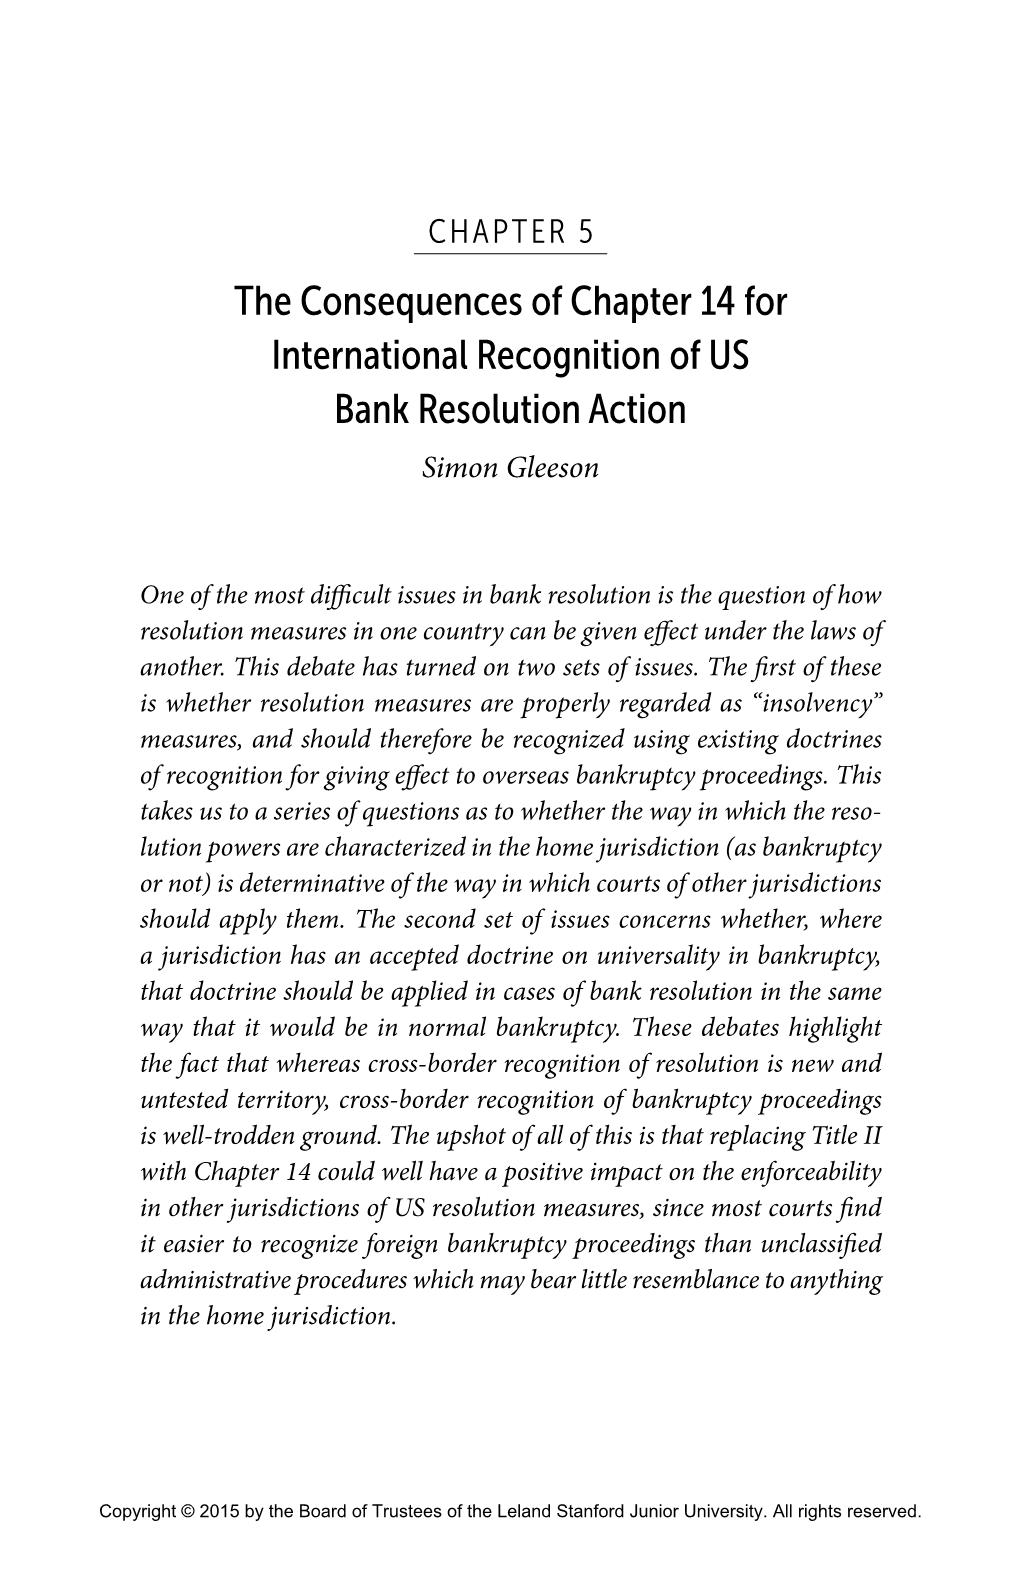 The Consequences of Chapter 14 for International Recognition of US Bank Resolution Action Simon Gleeson